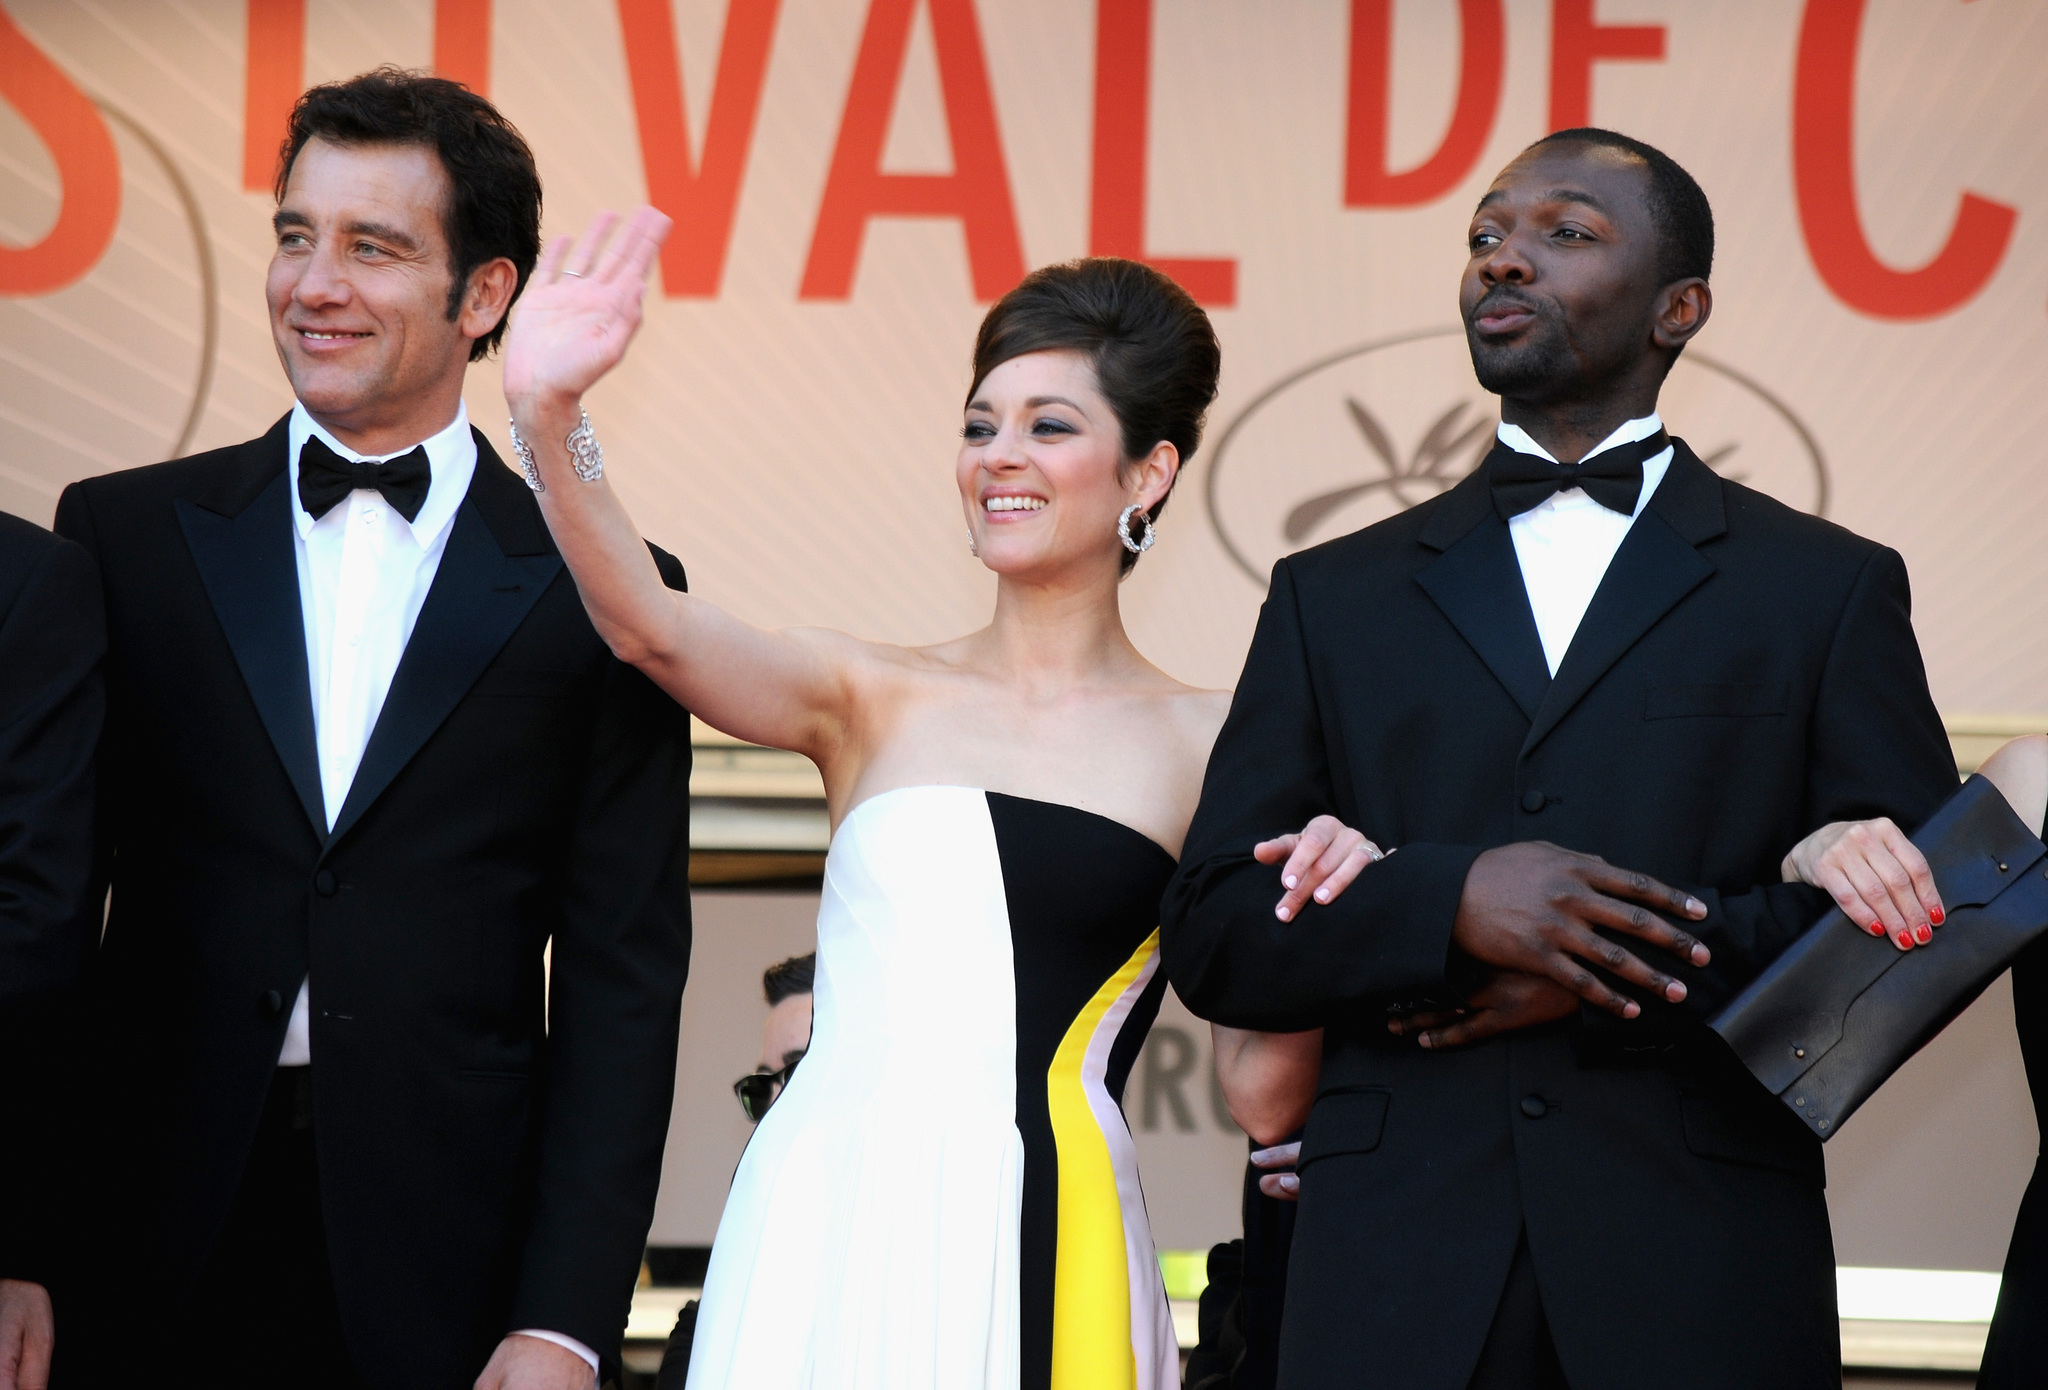 Marion Cotillard, Jamie Hector and Clive Owen at event of Blood Ties (2013)